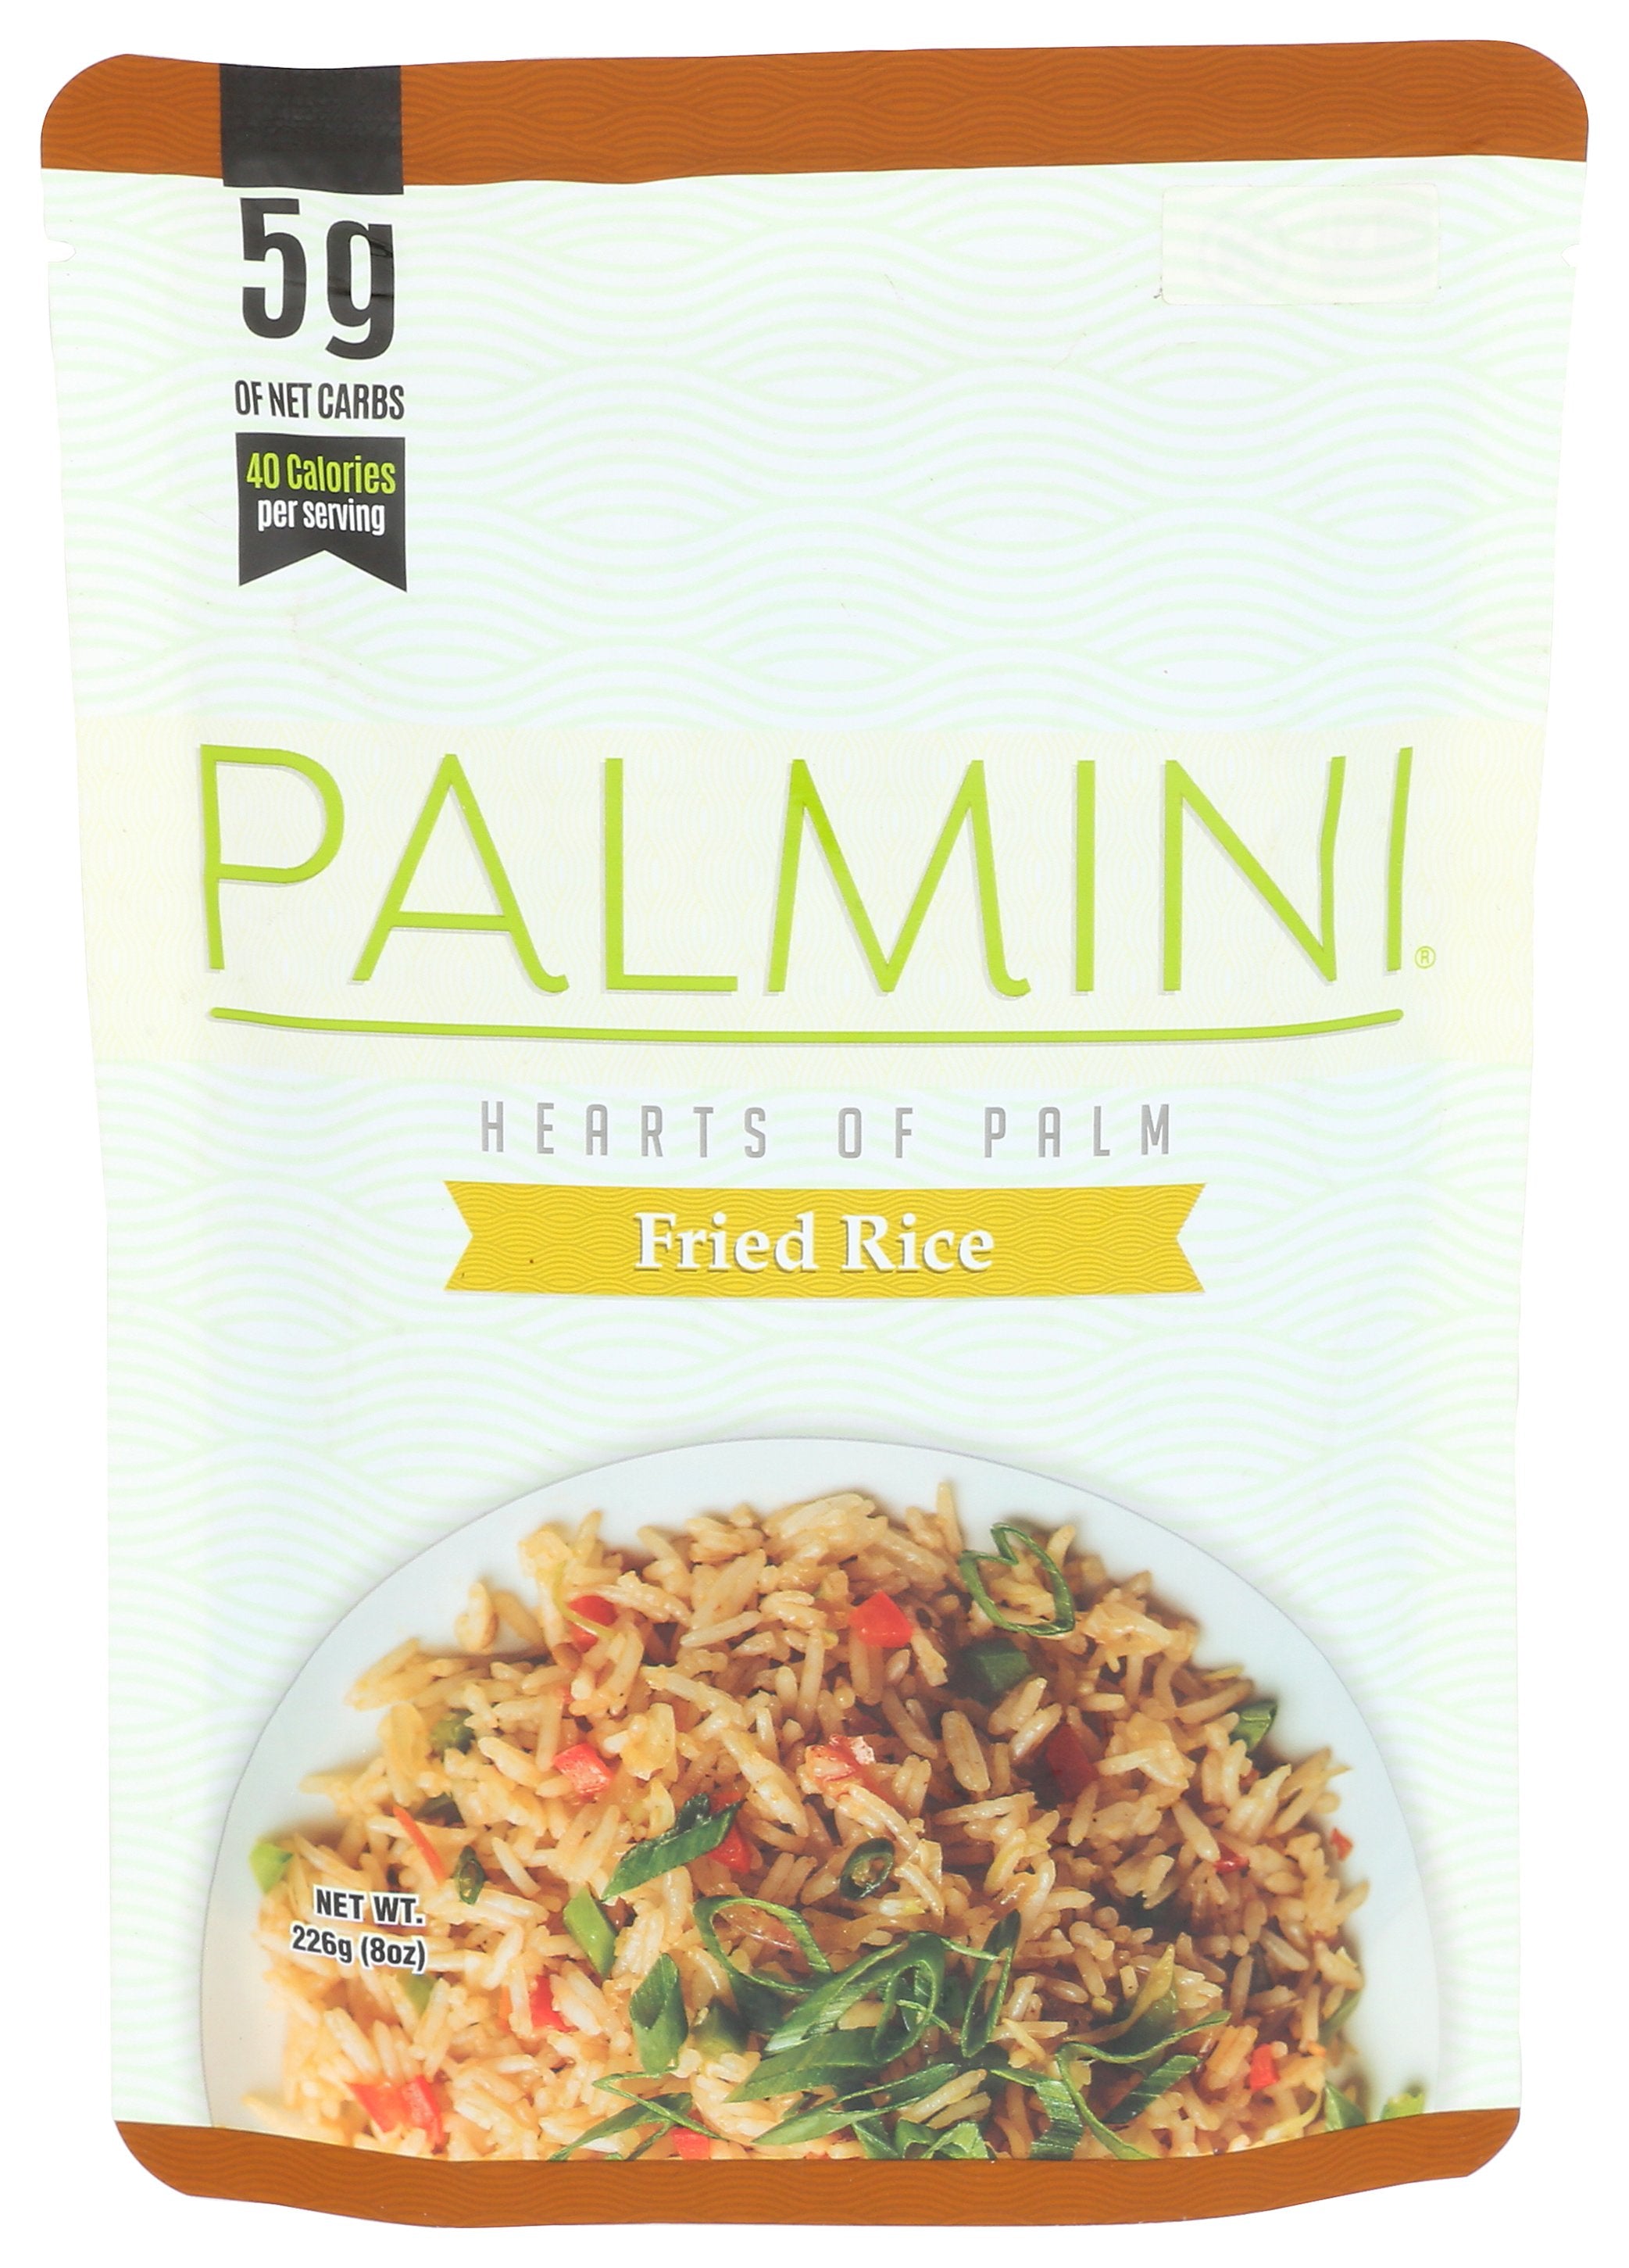 PALMINI RICE FRIED HEARTS OF PALM - Case of 6